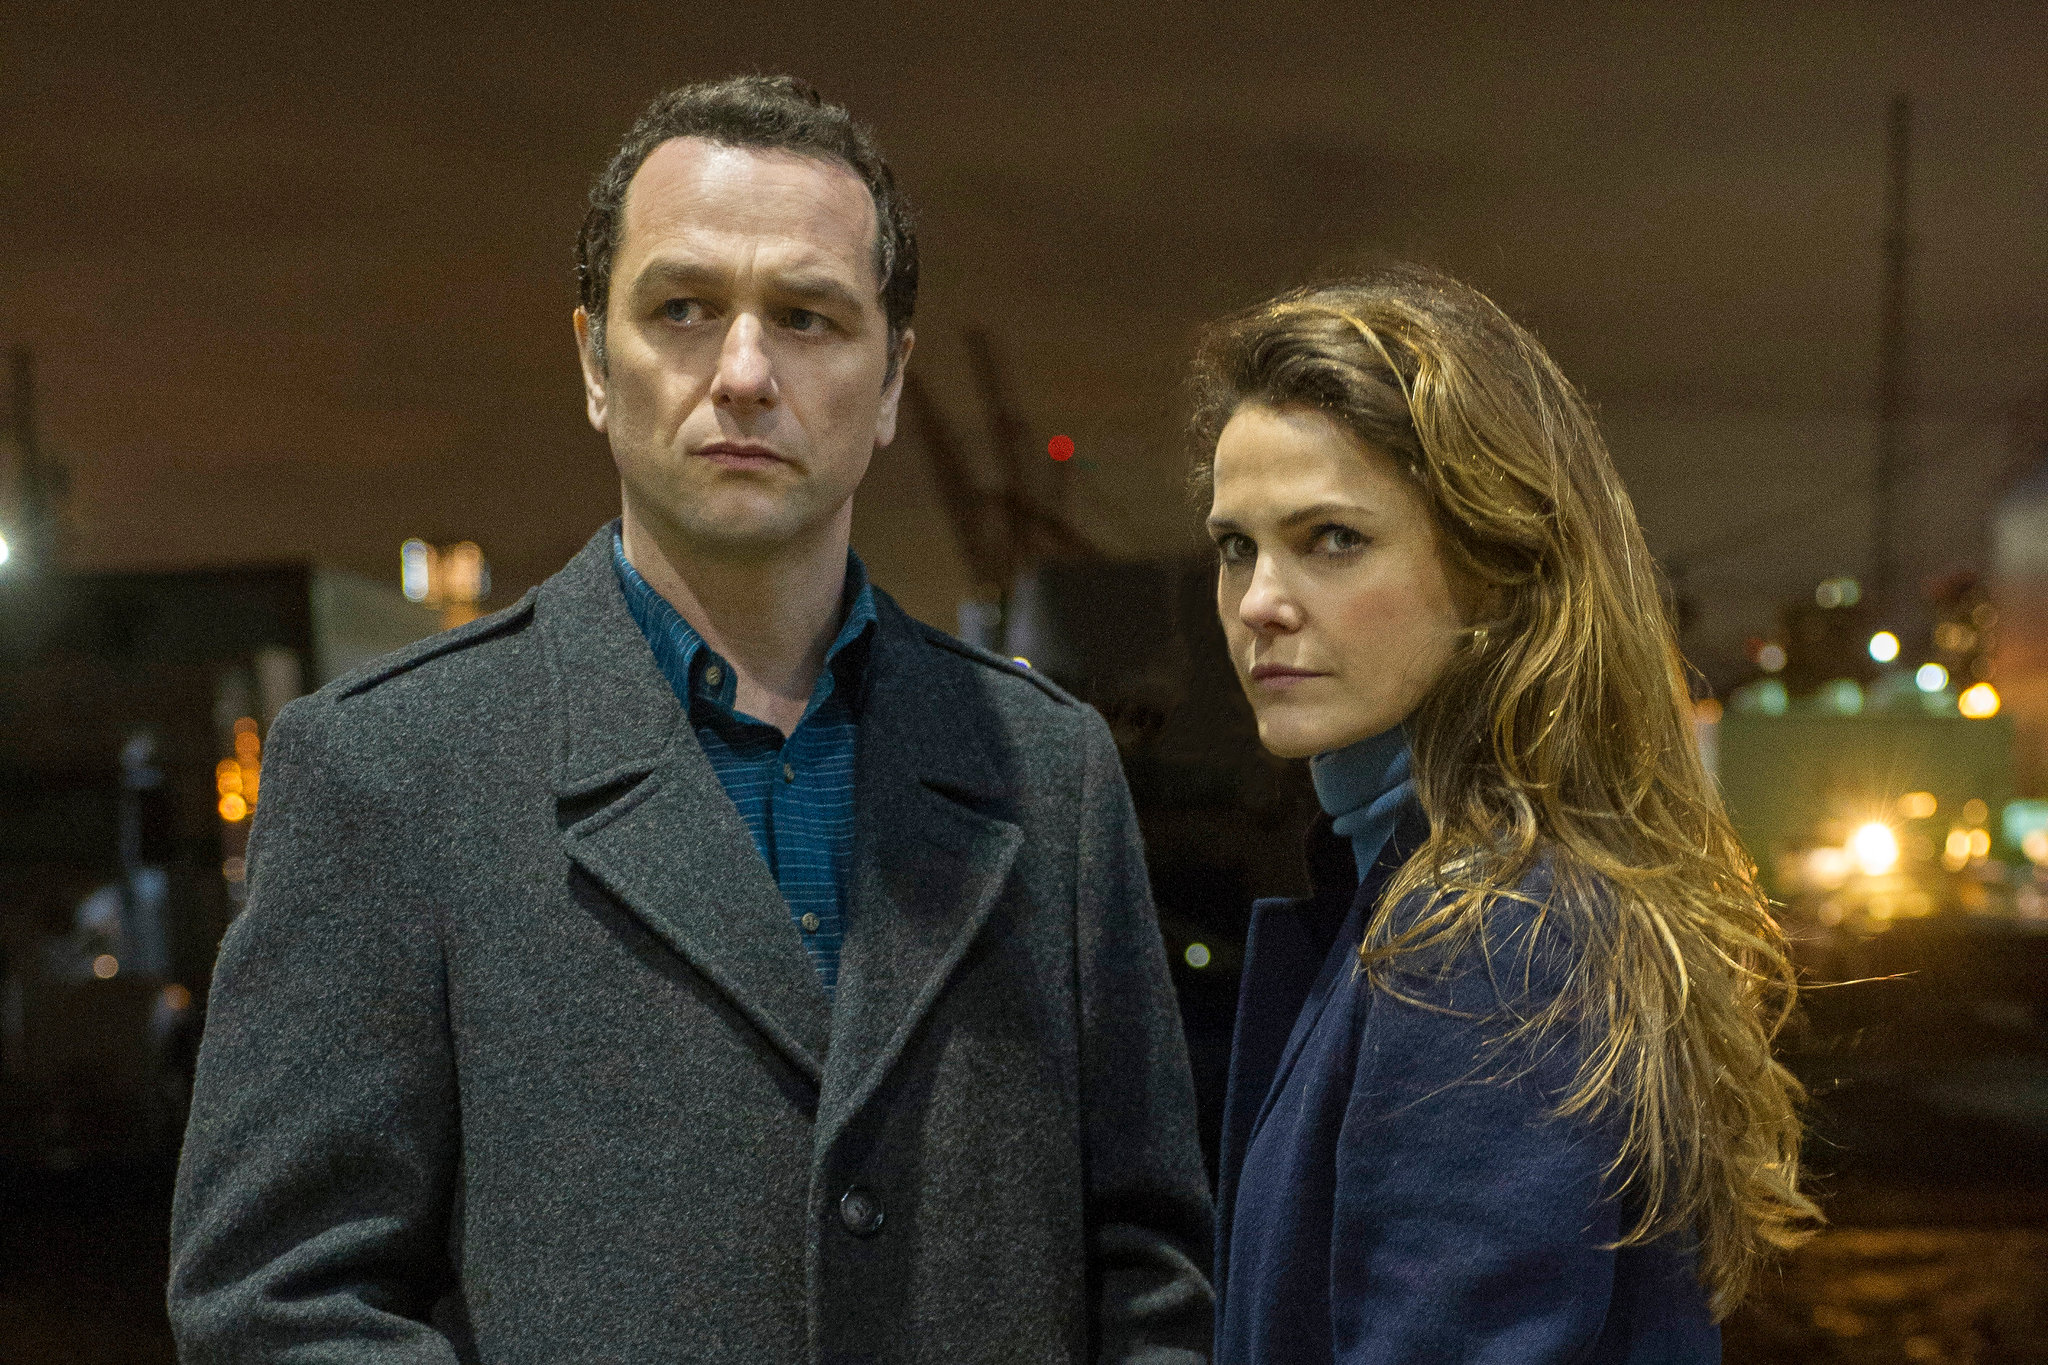 Modern Cult Classic TV Show: The Americans